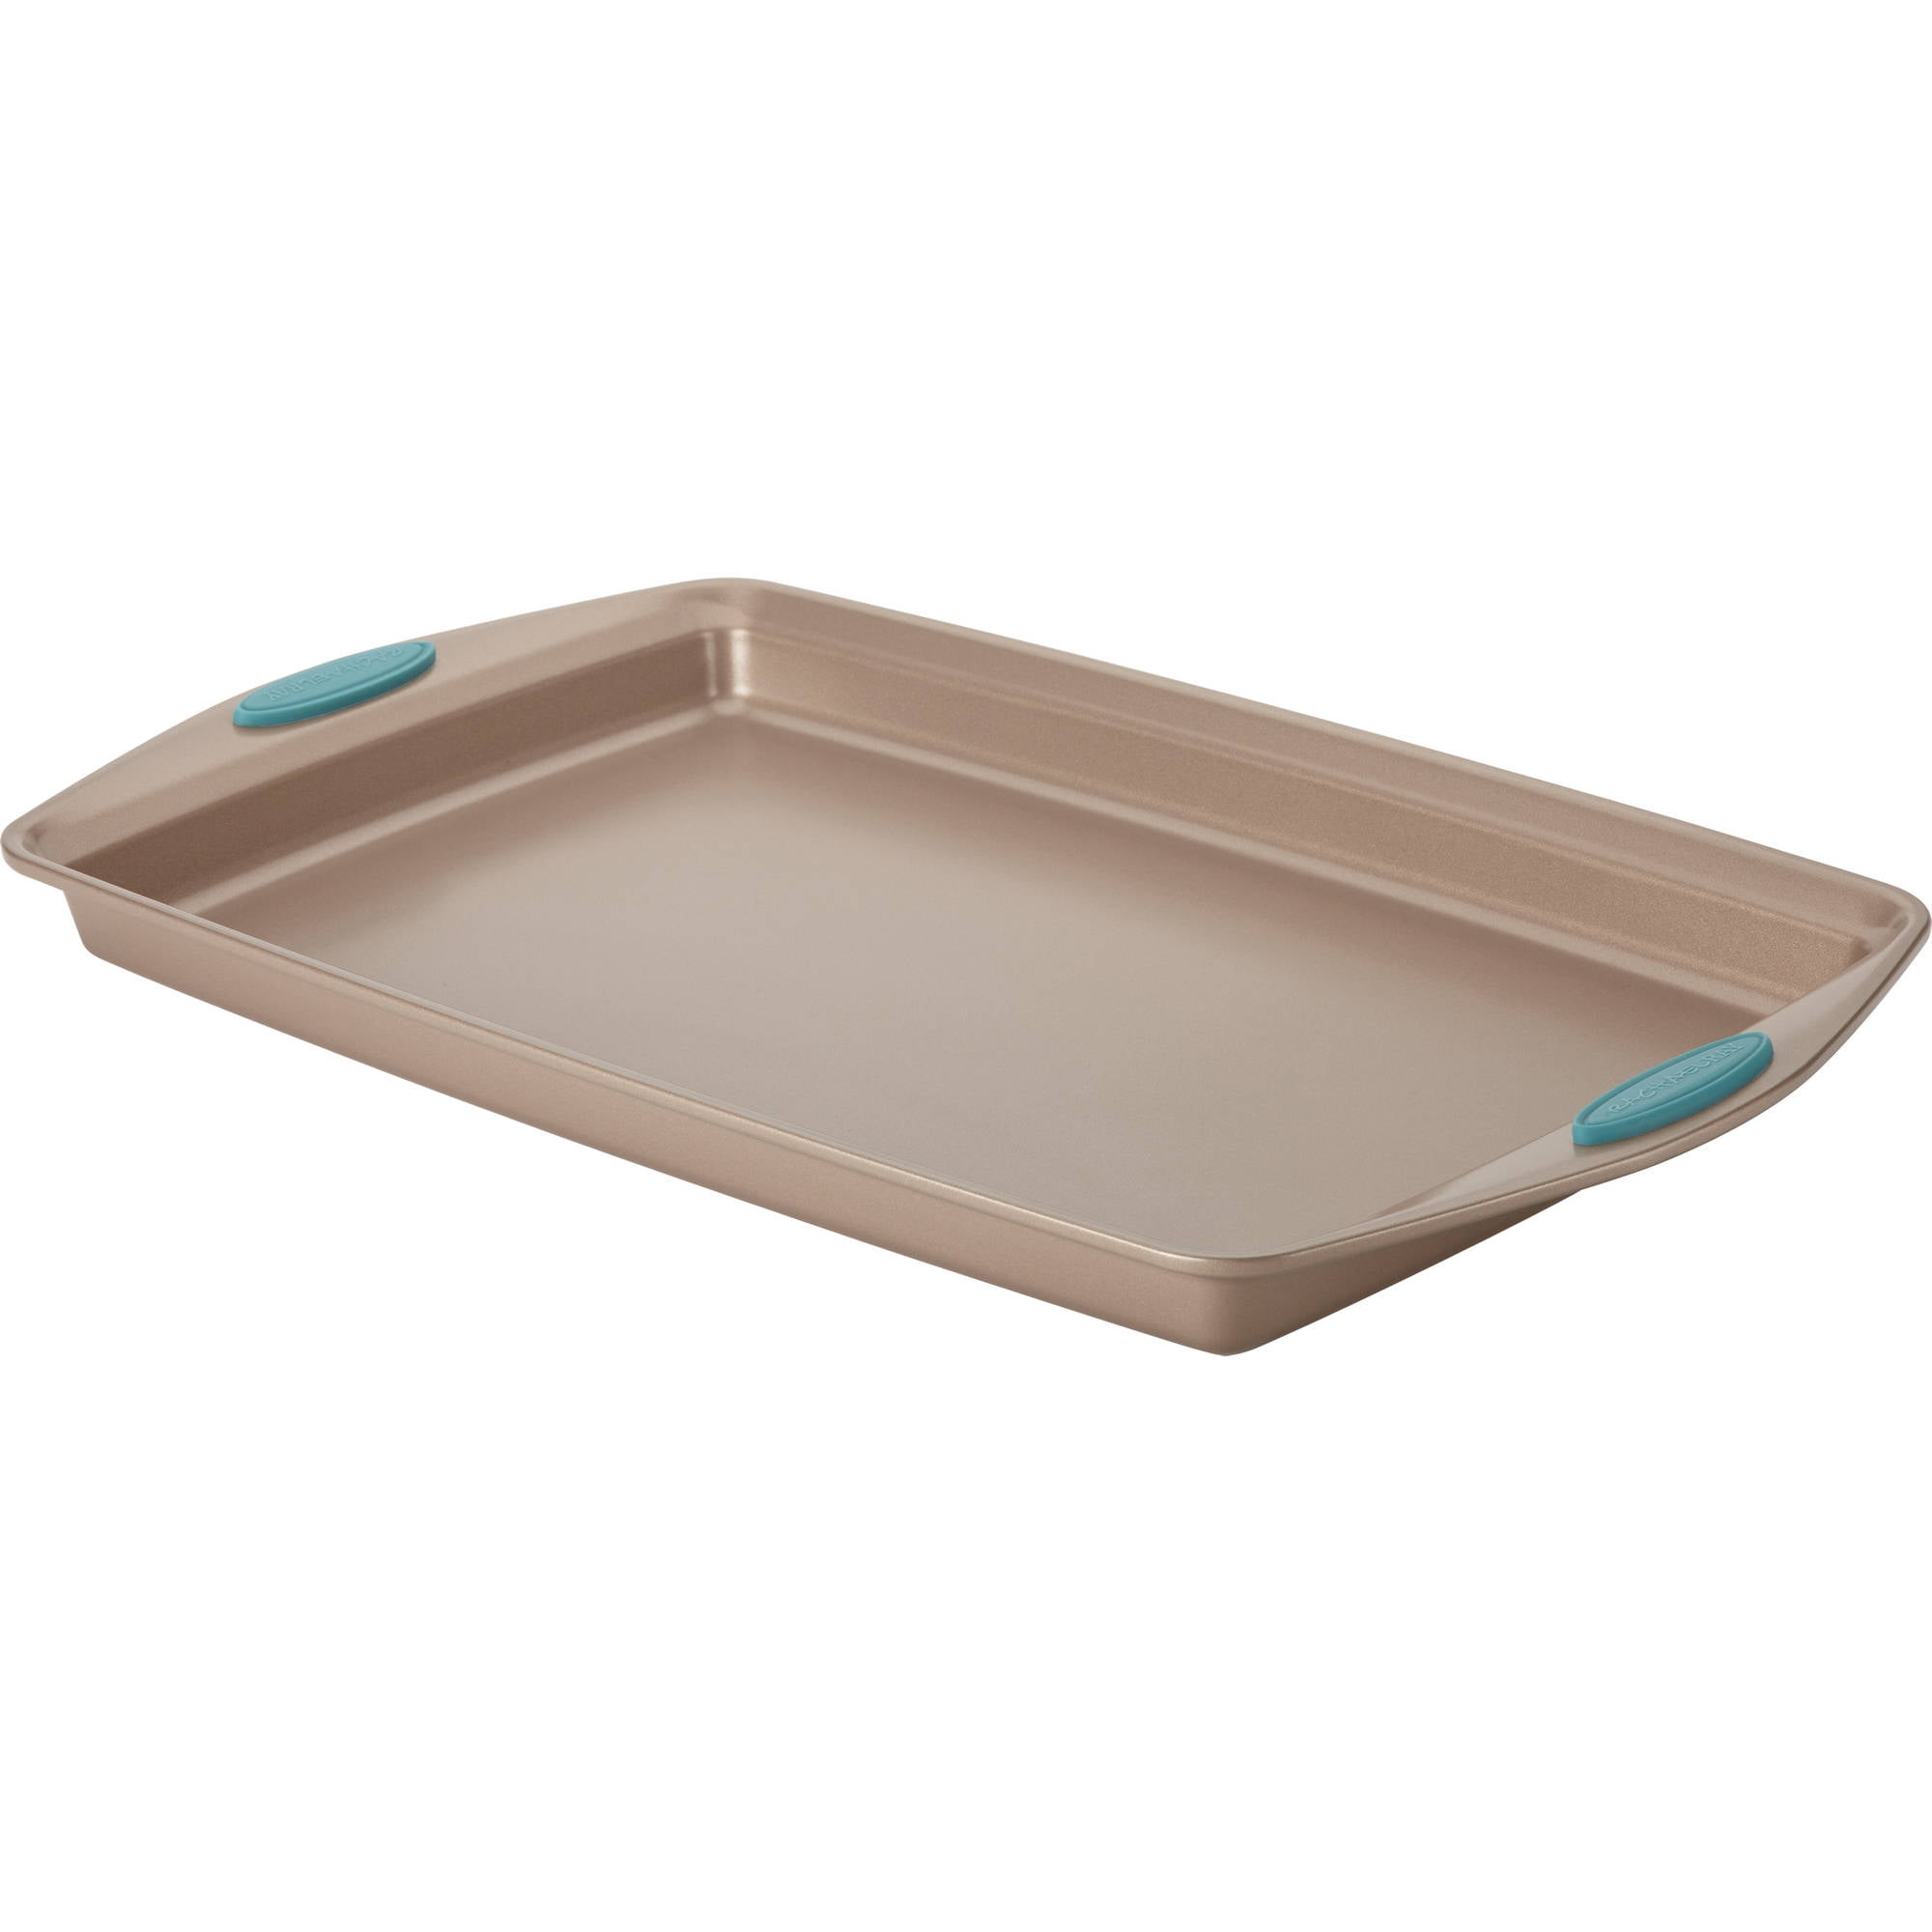 Nonstick Cookie Sheet / Baking Sheet Rachael Ray Nonstick Bakeware with Grips 11 Inch x 17 Inch Gray with Orange Grips